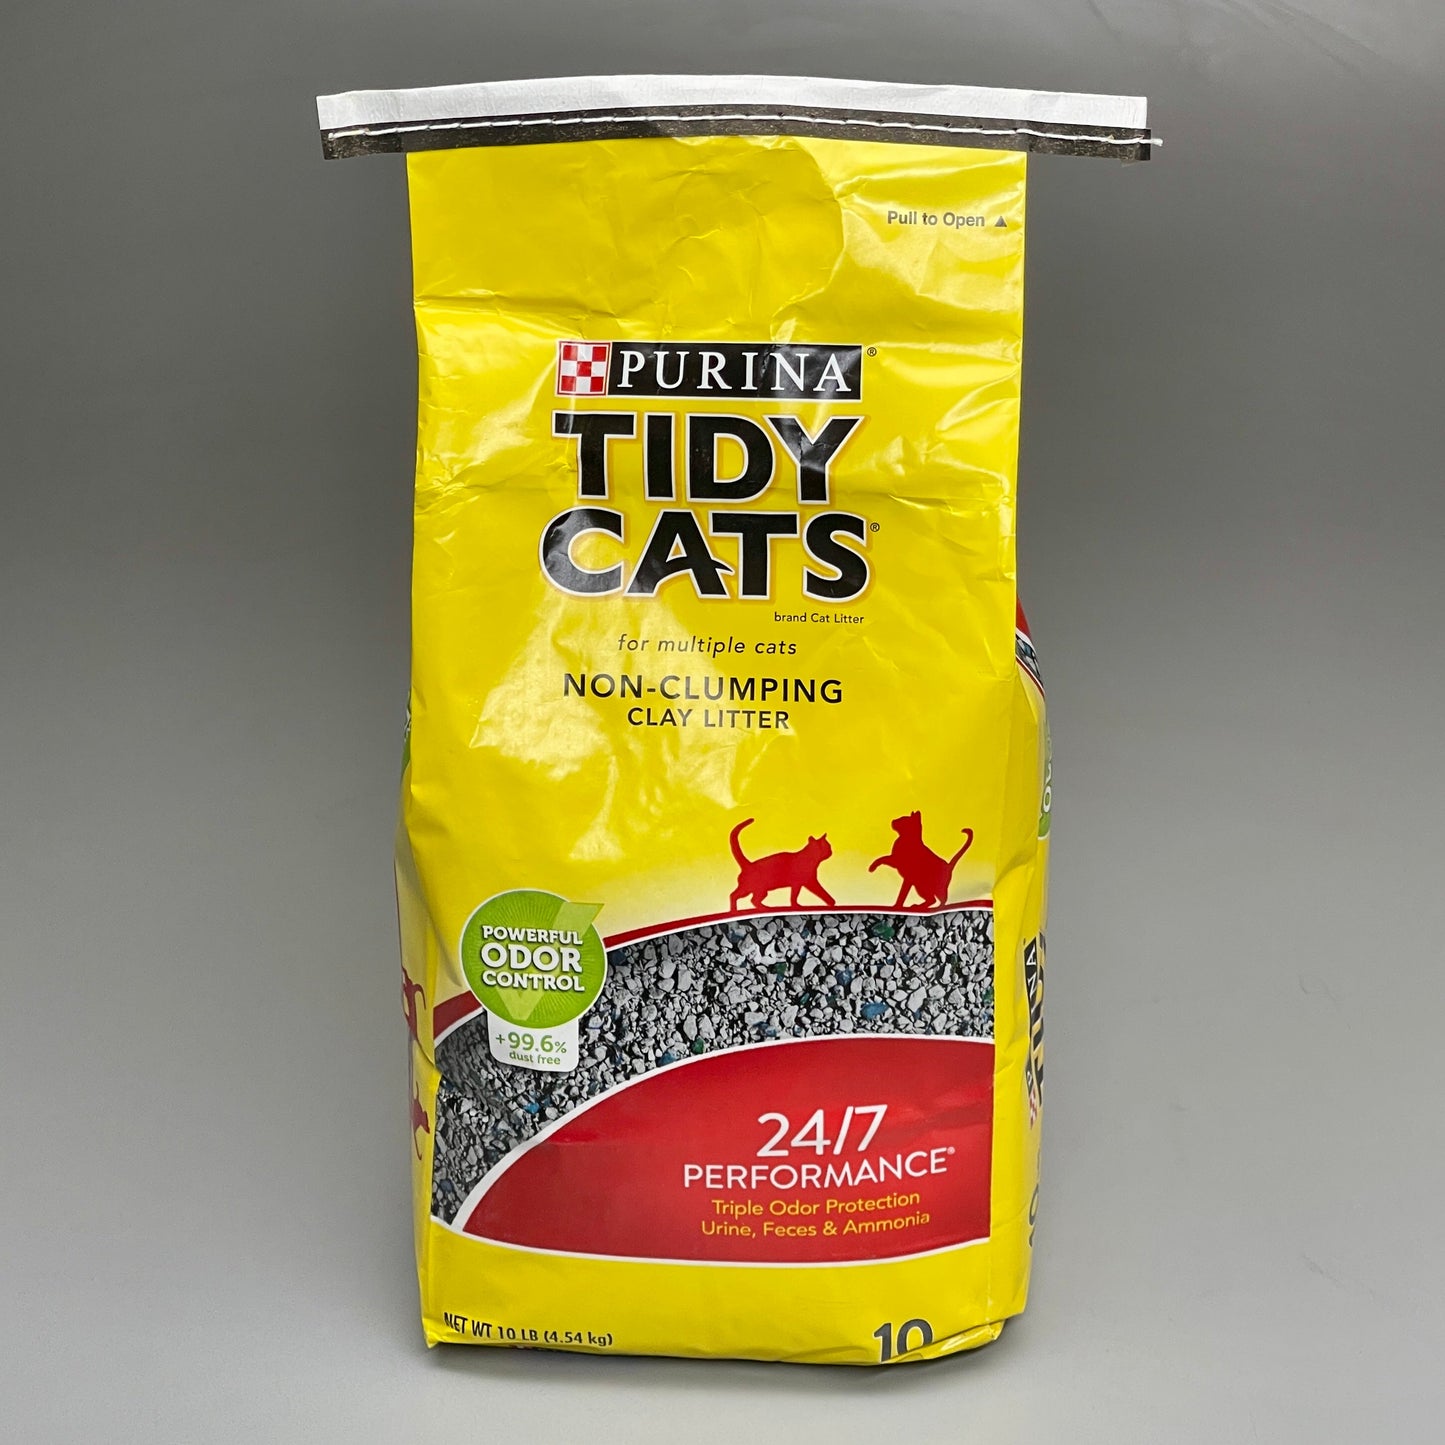 PURINA 40 POUNDS! (4 Bags) Tidy Cats Non Clumping Cat Litter 10 lb. Bags